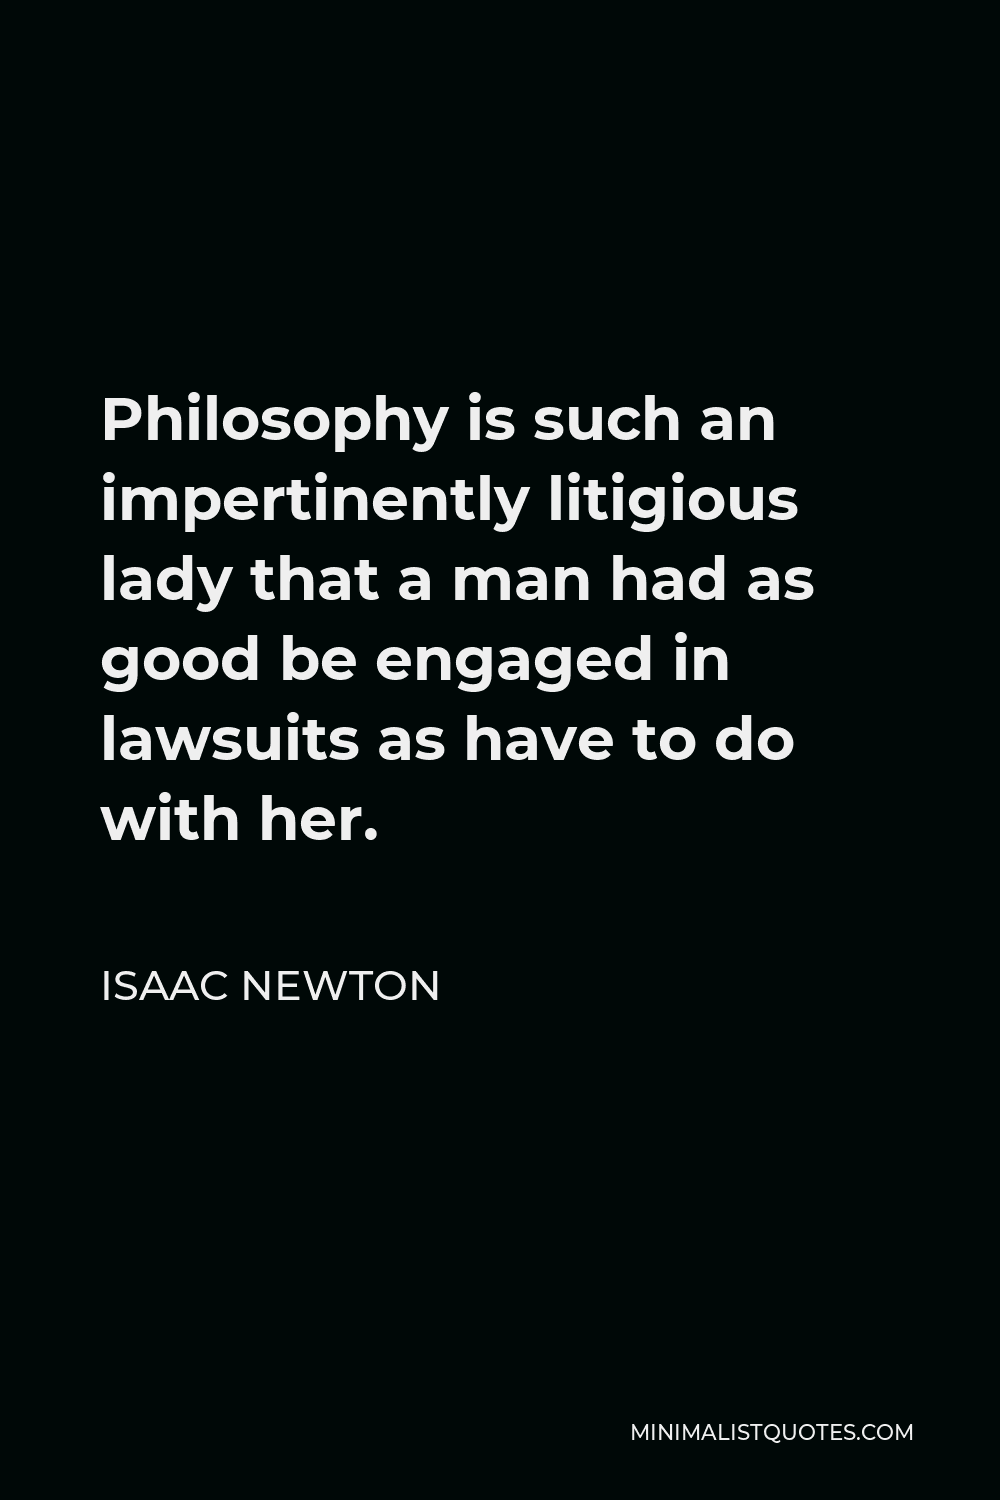 Isaac Newton Quote - Philosophy is such an impertinently litigious lady that a man had as good be engaged in lawsuits as have to do with her.